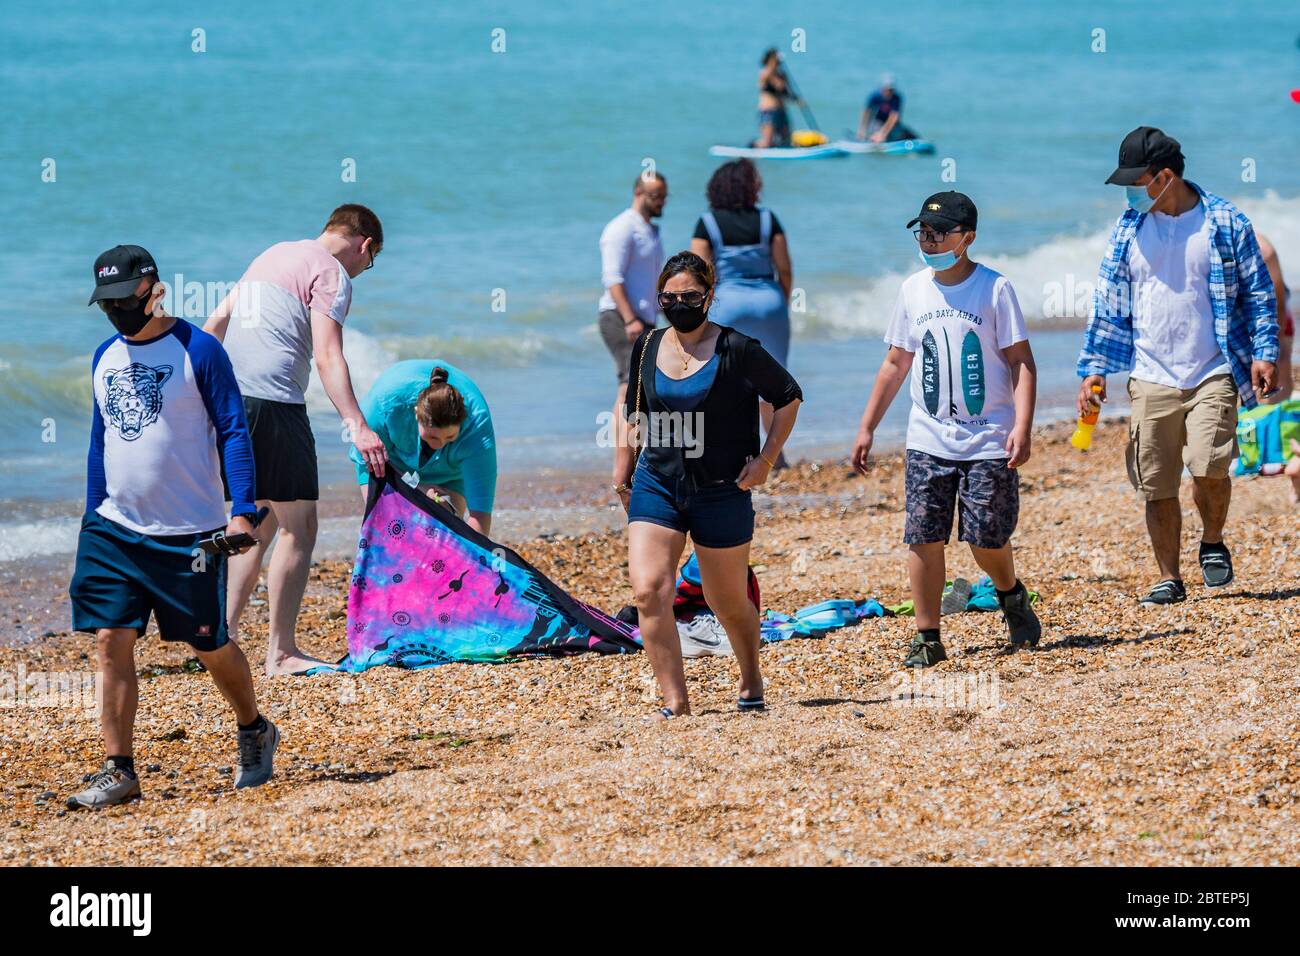 Brighton, UK. 25th May, 2020. A family in masks ar unusual on the beach - It is sunny and people come to the beach and the seaside at Brighton, during Bank holiday Monday. It is busy but still plentyu of room for social distancing. The eased 'lockdown' continues for the Coronavirus (Covid 19) outbreak. Credit: Guy Bell/Alamy Live News Stock Photo